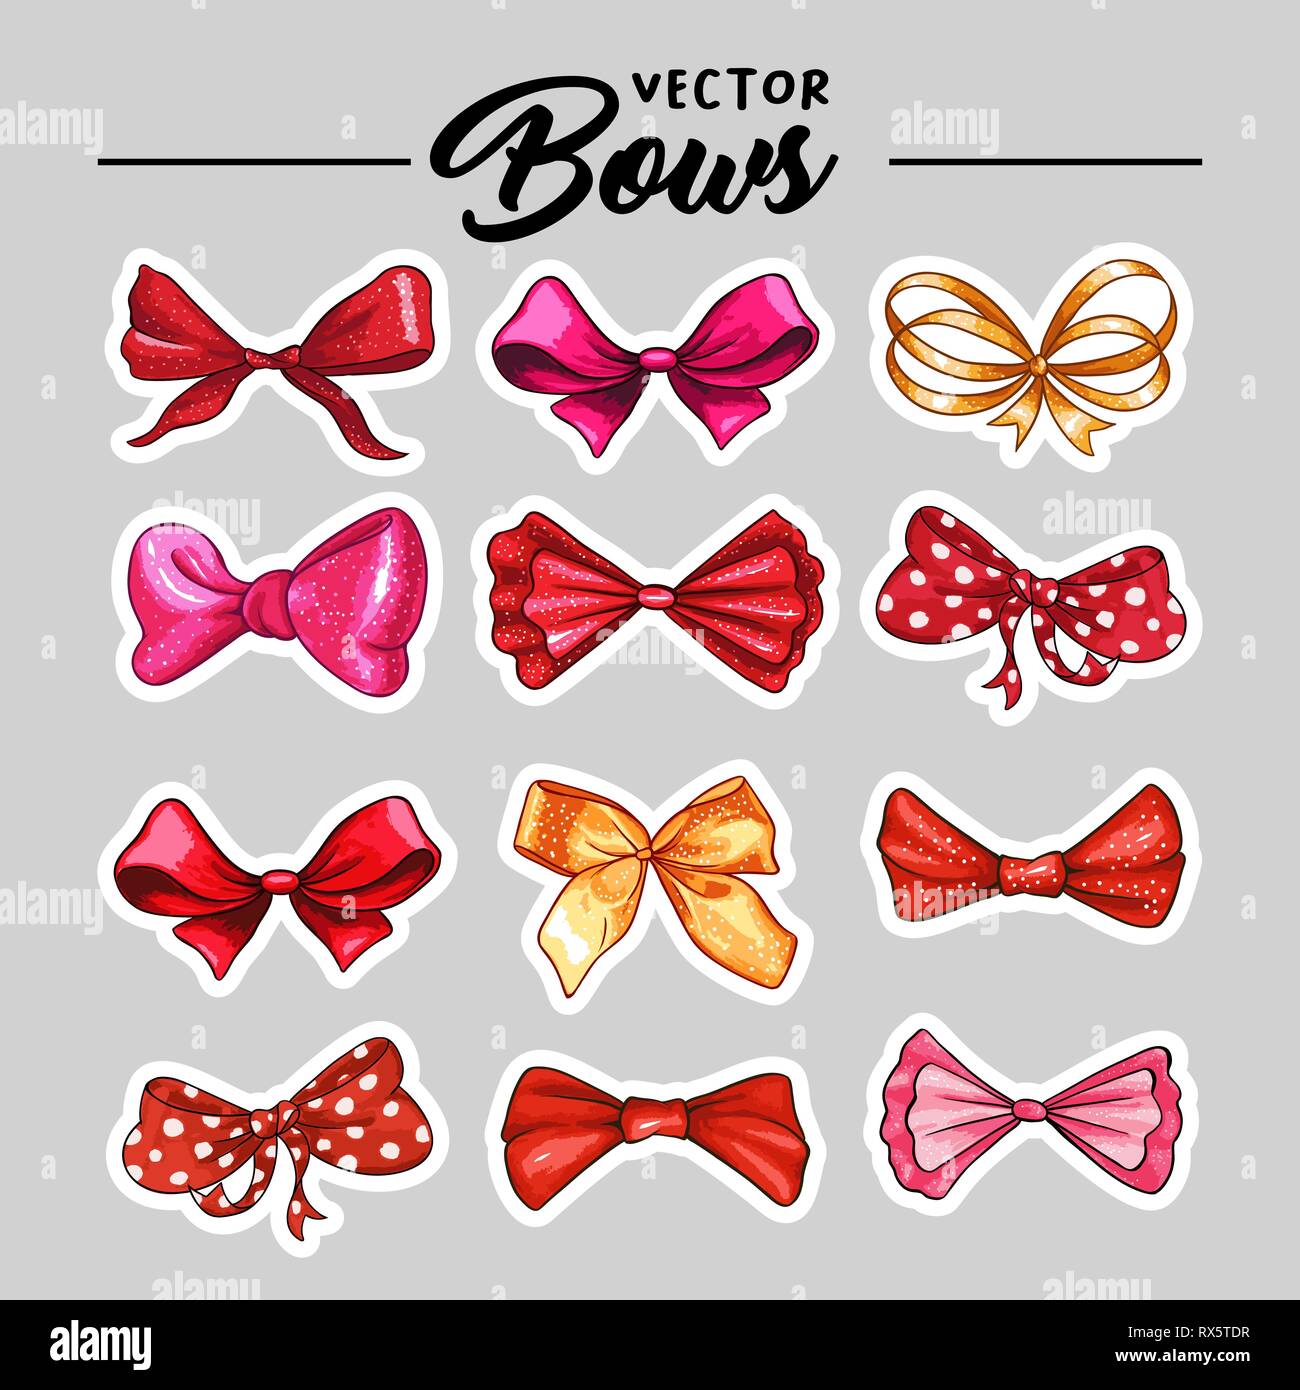 Free Ribbons and Bows Design Elements in Neon Red